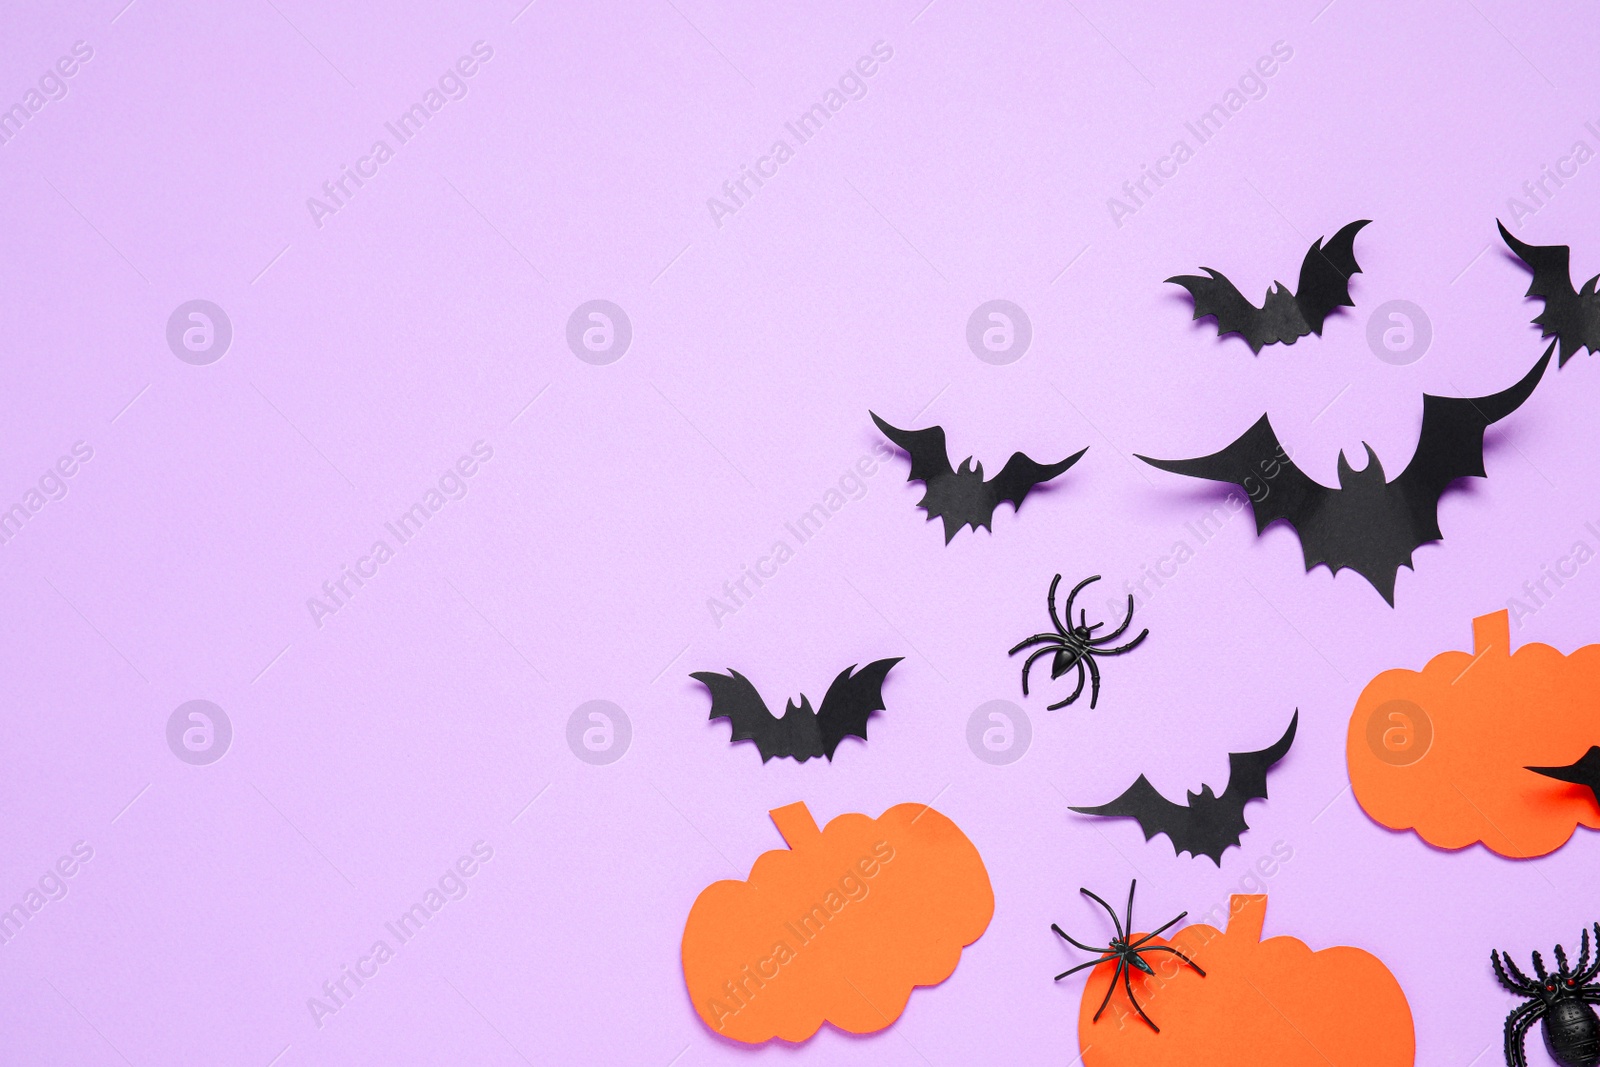 Photo of Flat lay composition with paper bats, spiders and pumpkins on light violet background, space for text. Halloween decor